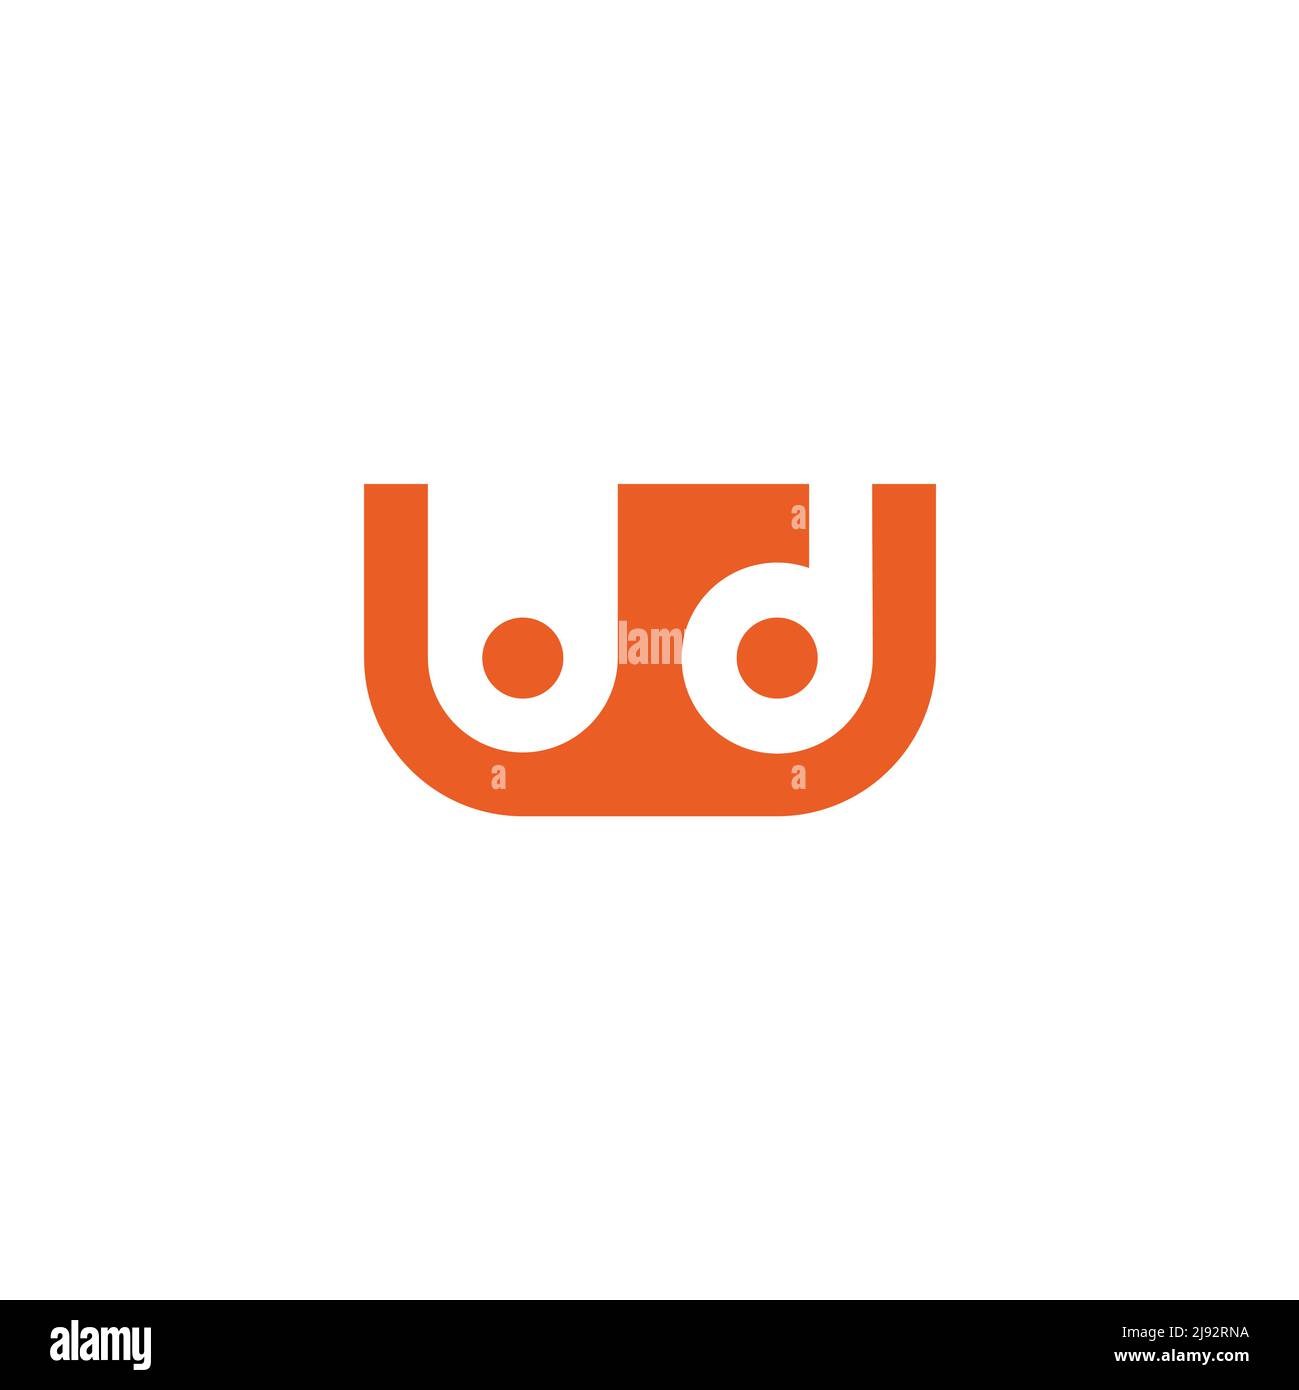 letters ud simple geometric dots logo vector Stock Vector